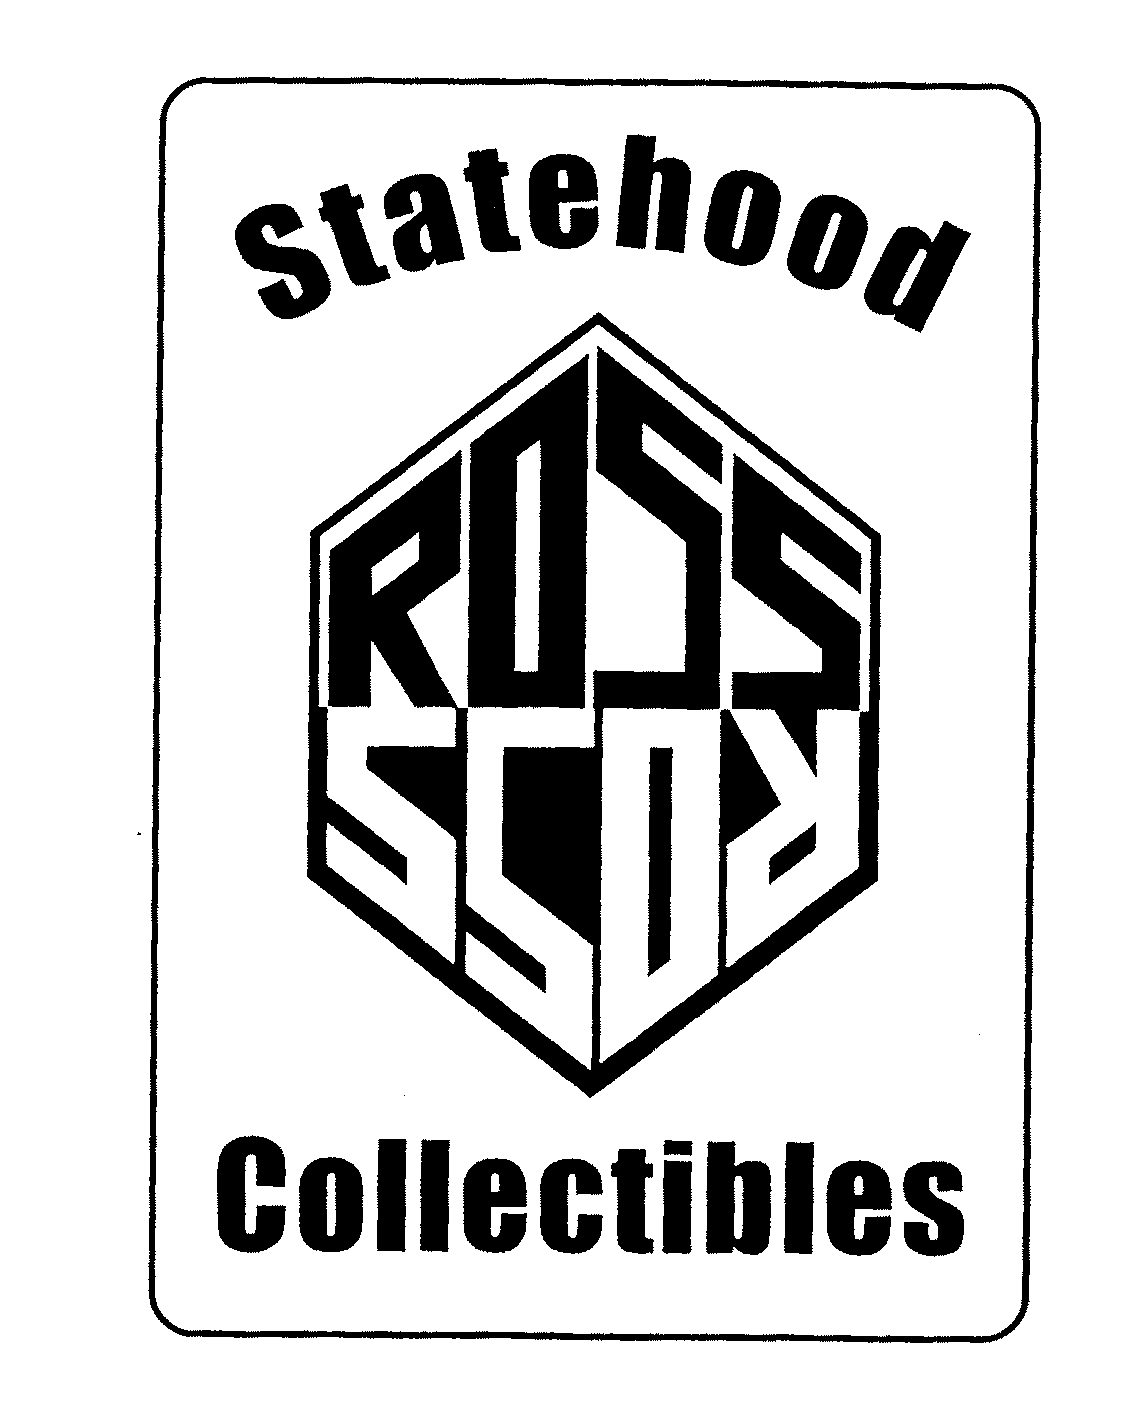  STATEHOOD ROSS COLLECTIBLES